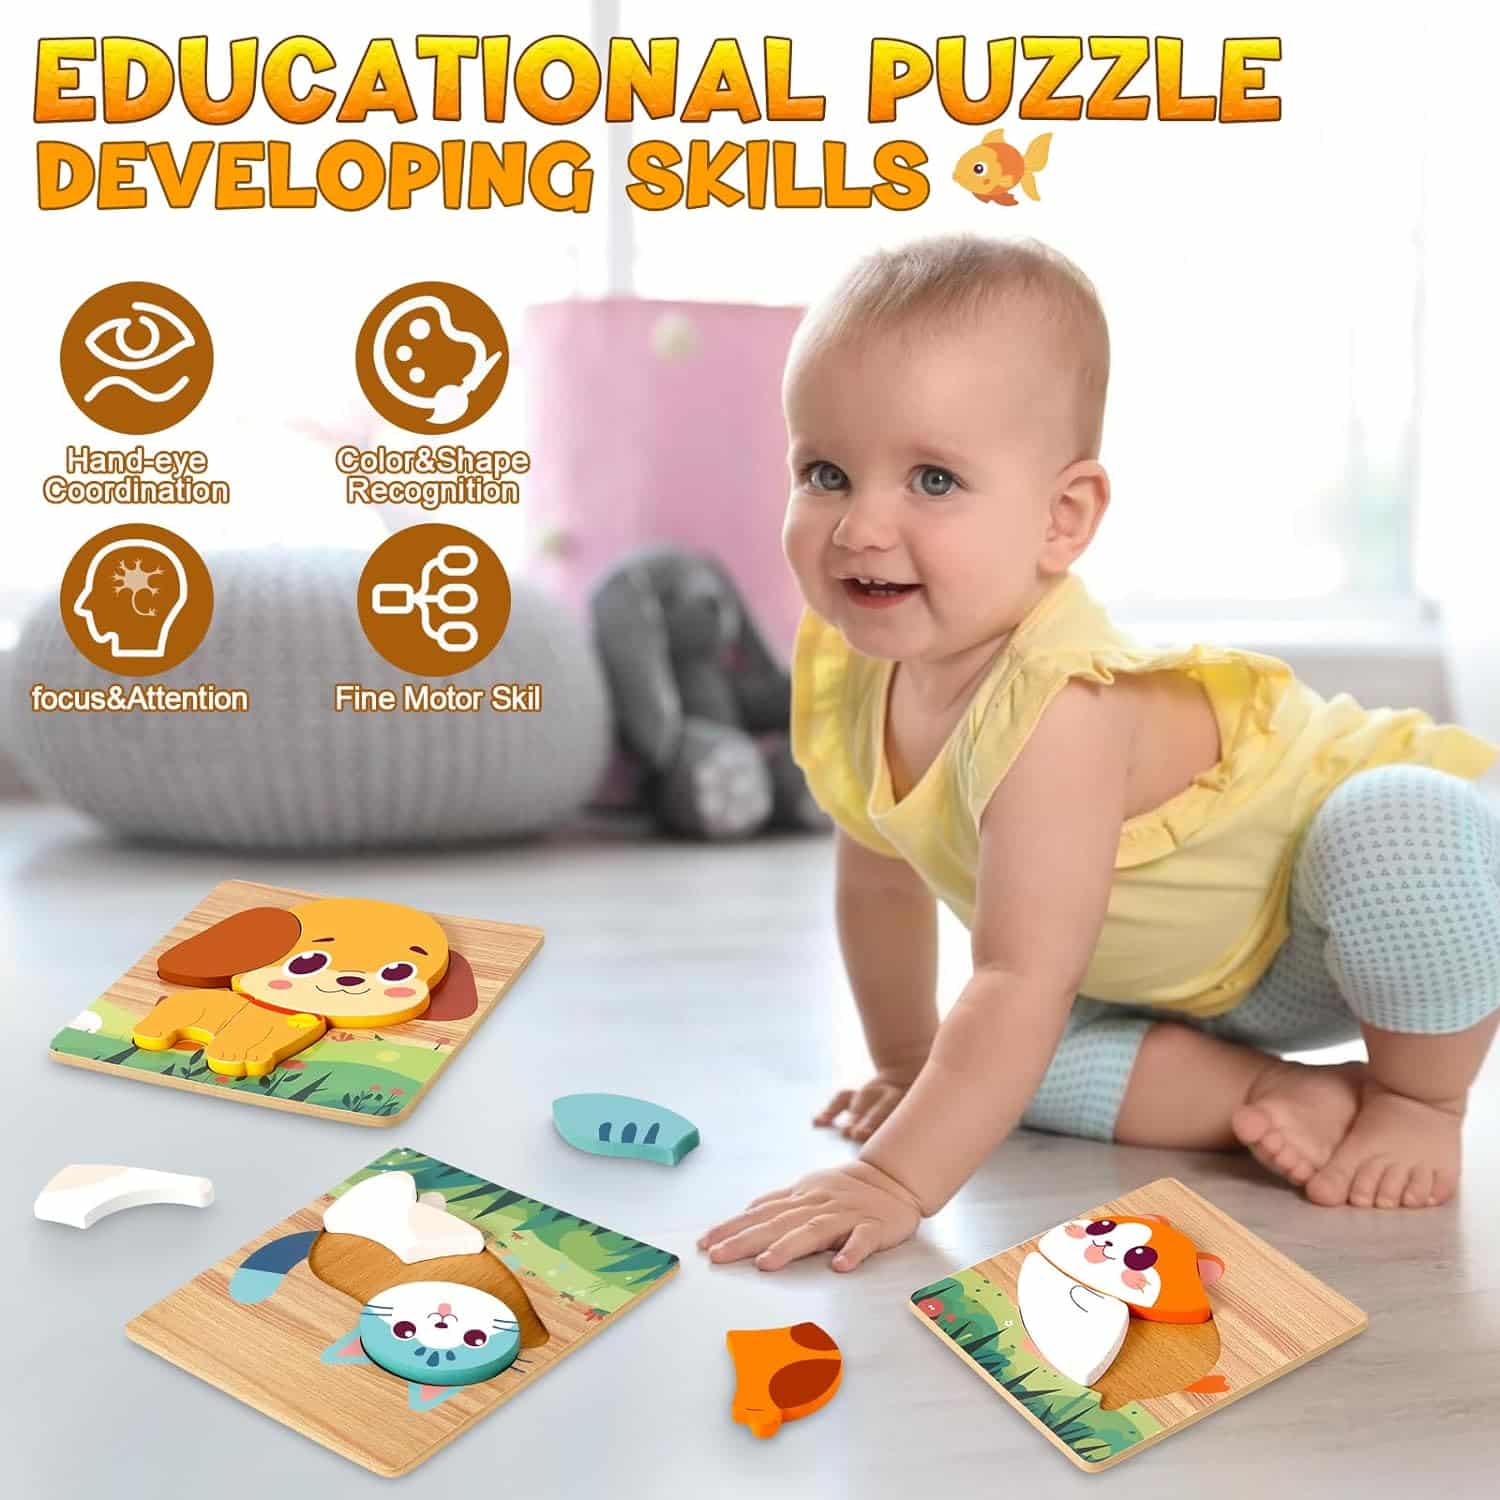 LURLIN's Wooden Puzzles for Toddlers 1-3: A Wholesome Learning Experience